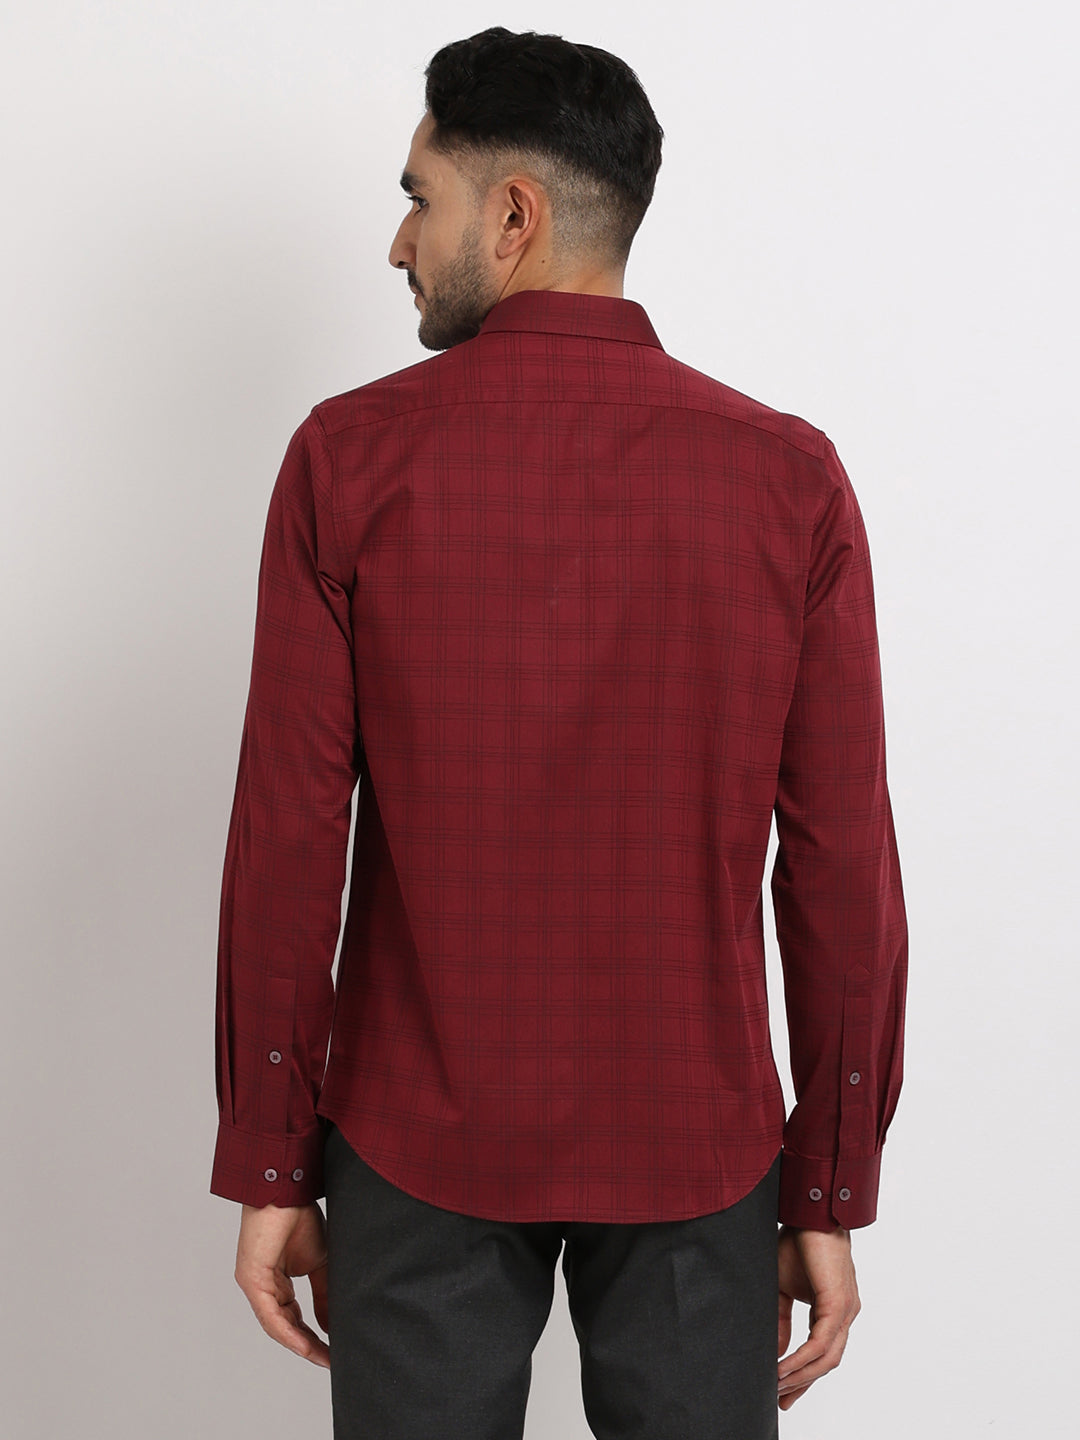 100% Cotton Maroon Checkered Slim Fit Full Sleeve Formal Shirt